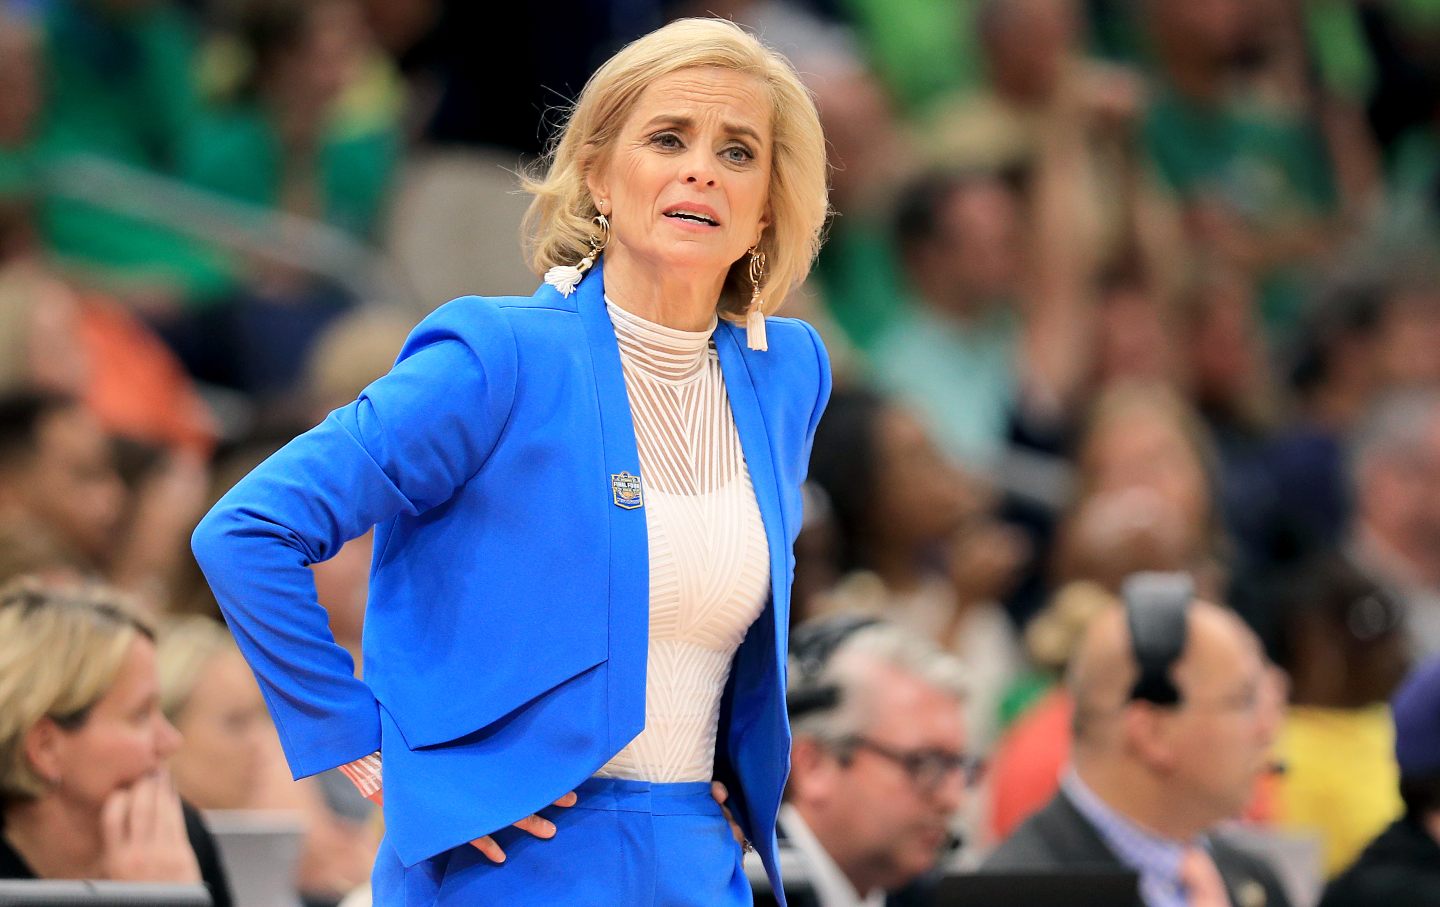 Baylor women's basketball head coach Kim Mulkey reacts during a game against Notre Dame at the 2019 NCAA Women's Final Four